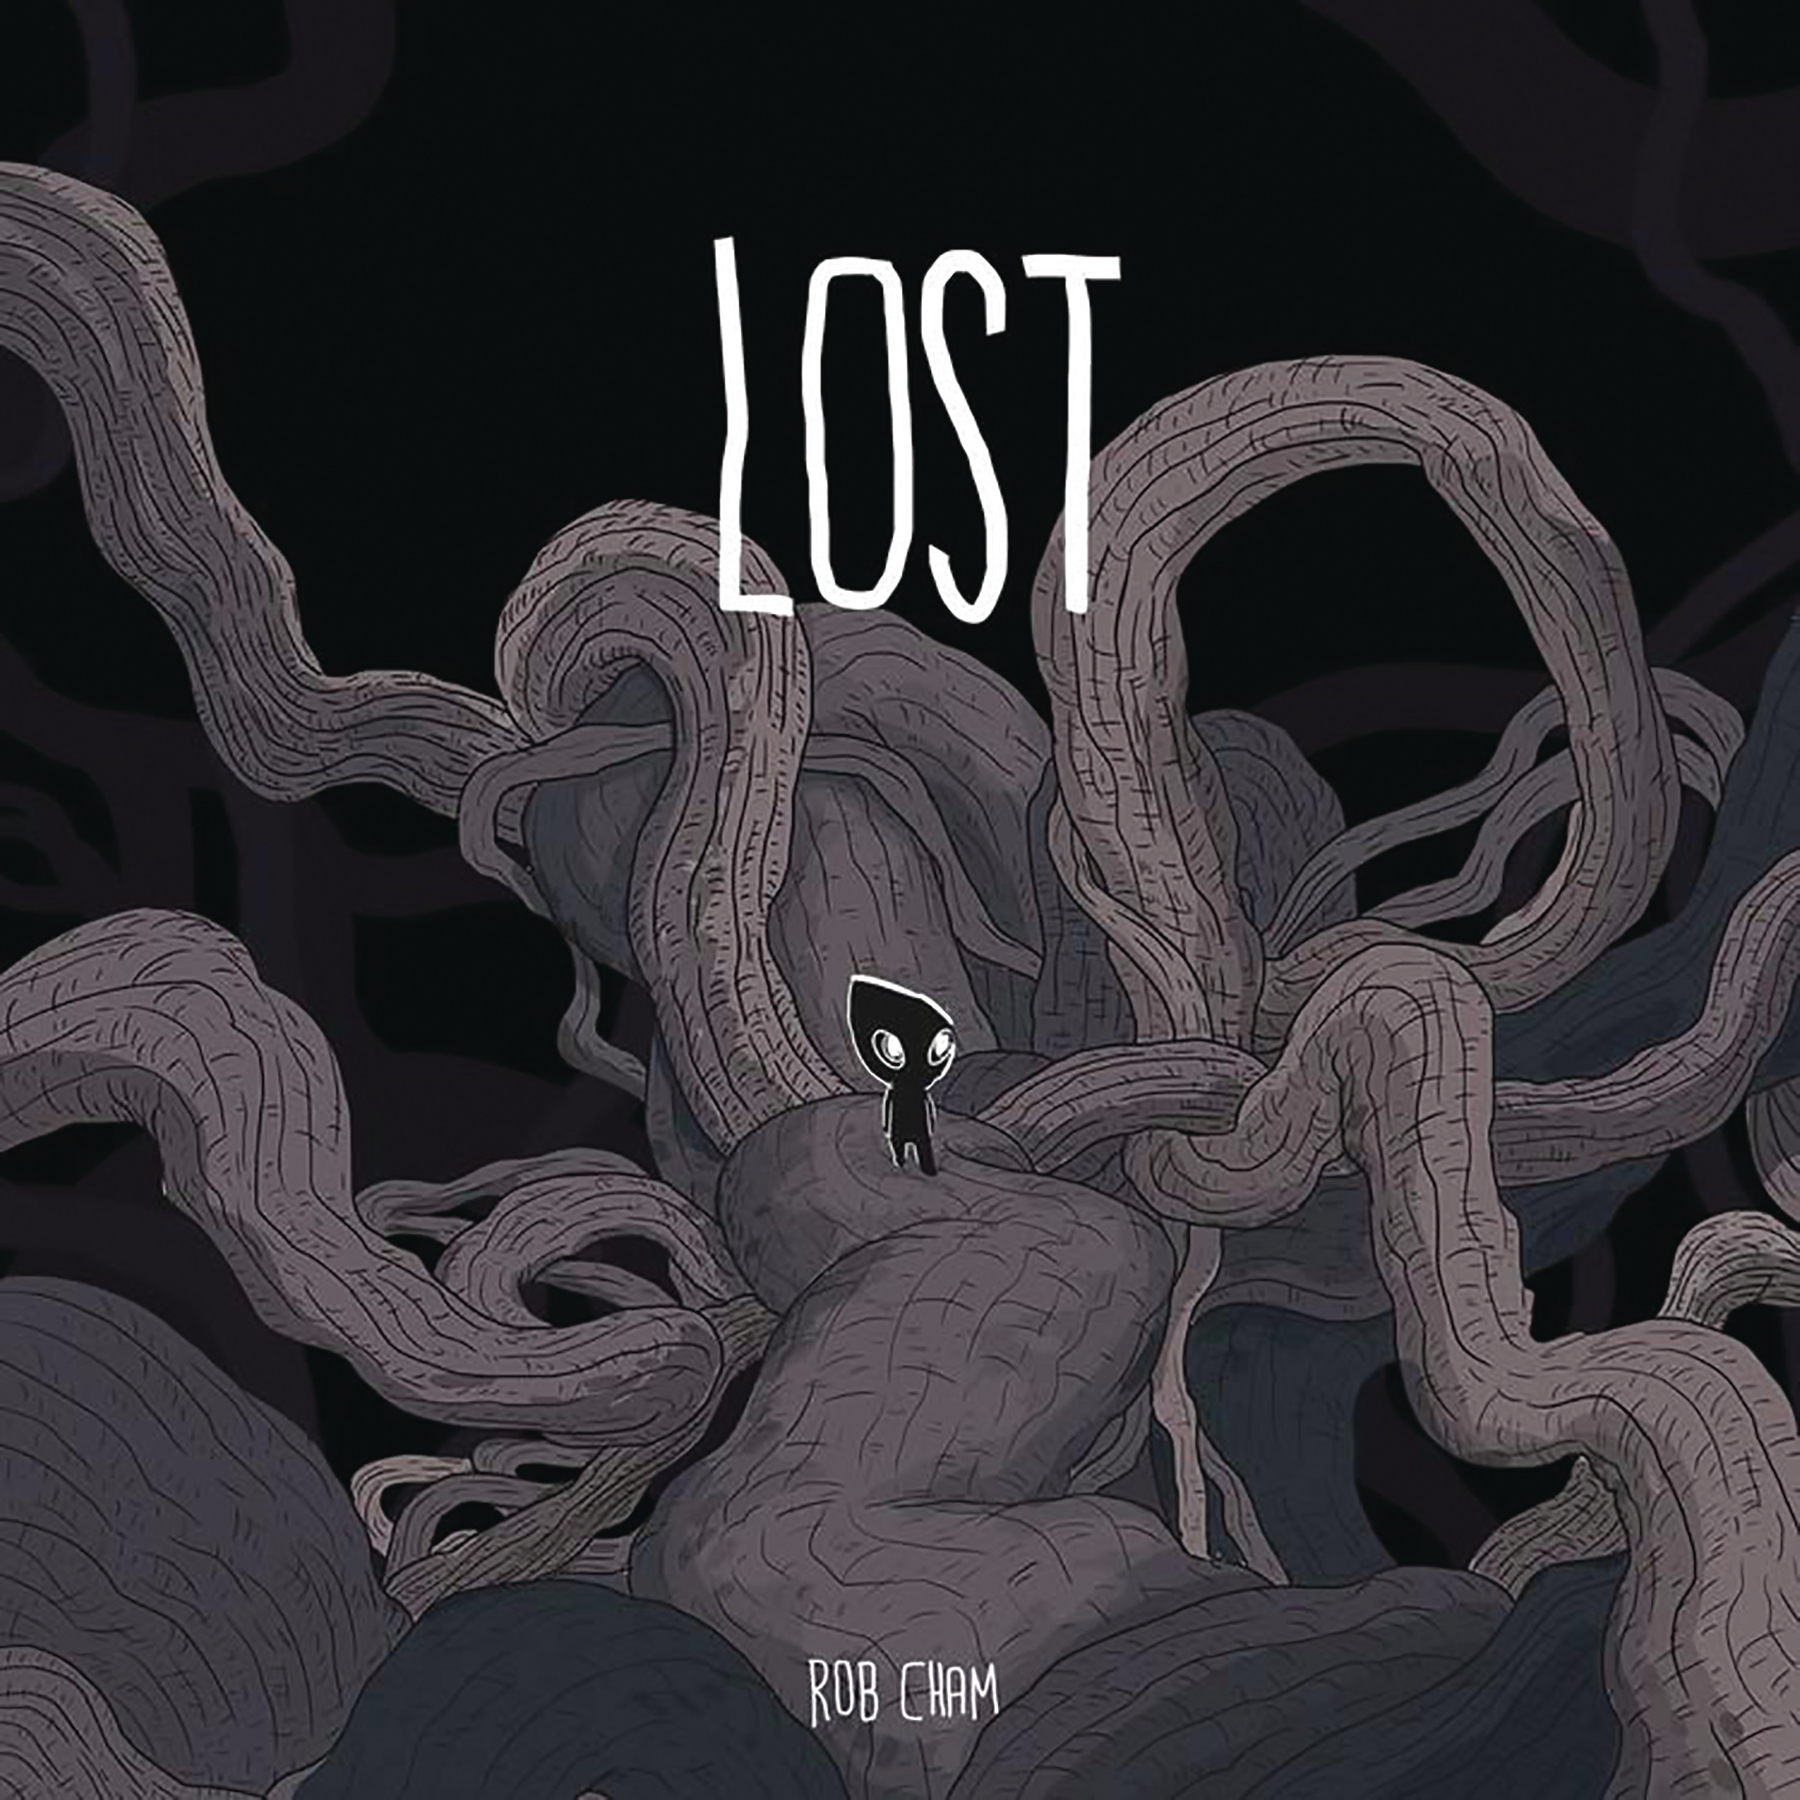 Lost Soft Cover Graphic Novel